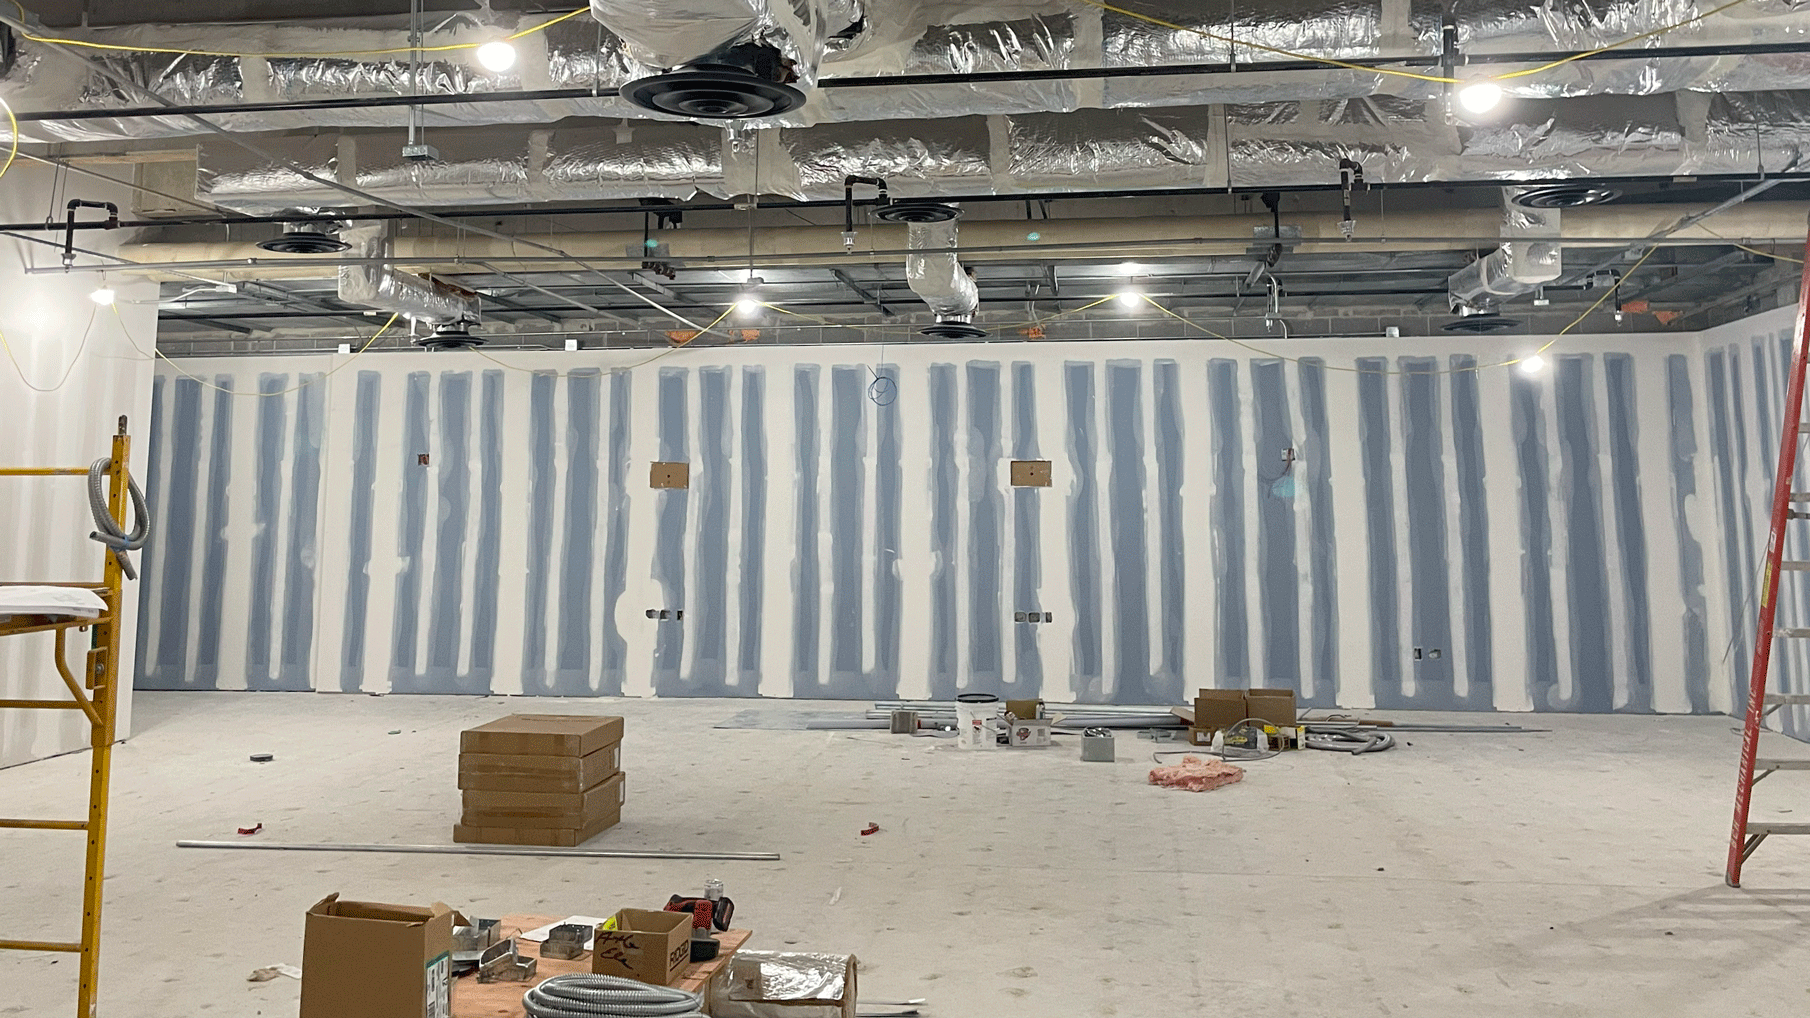 A picture of the interior of the lab, with drywall and HVAC visible